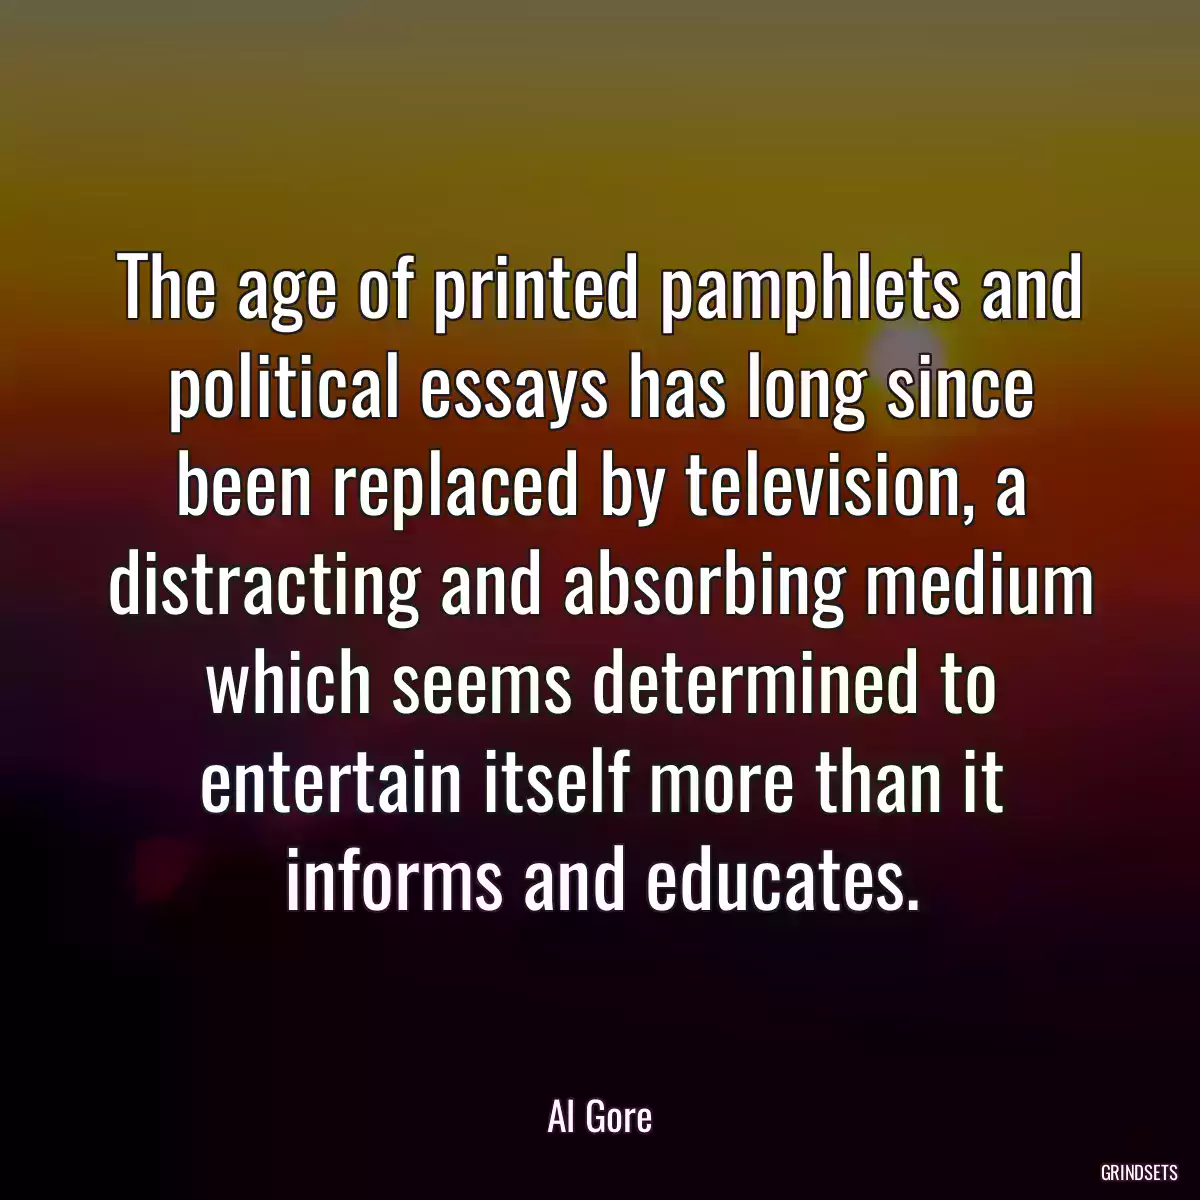 The age of printed pamphlets and political essays has long since been replaced by television, a distracting and absorbing medium which seems determined to entertain itself more than it informs and educates.